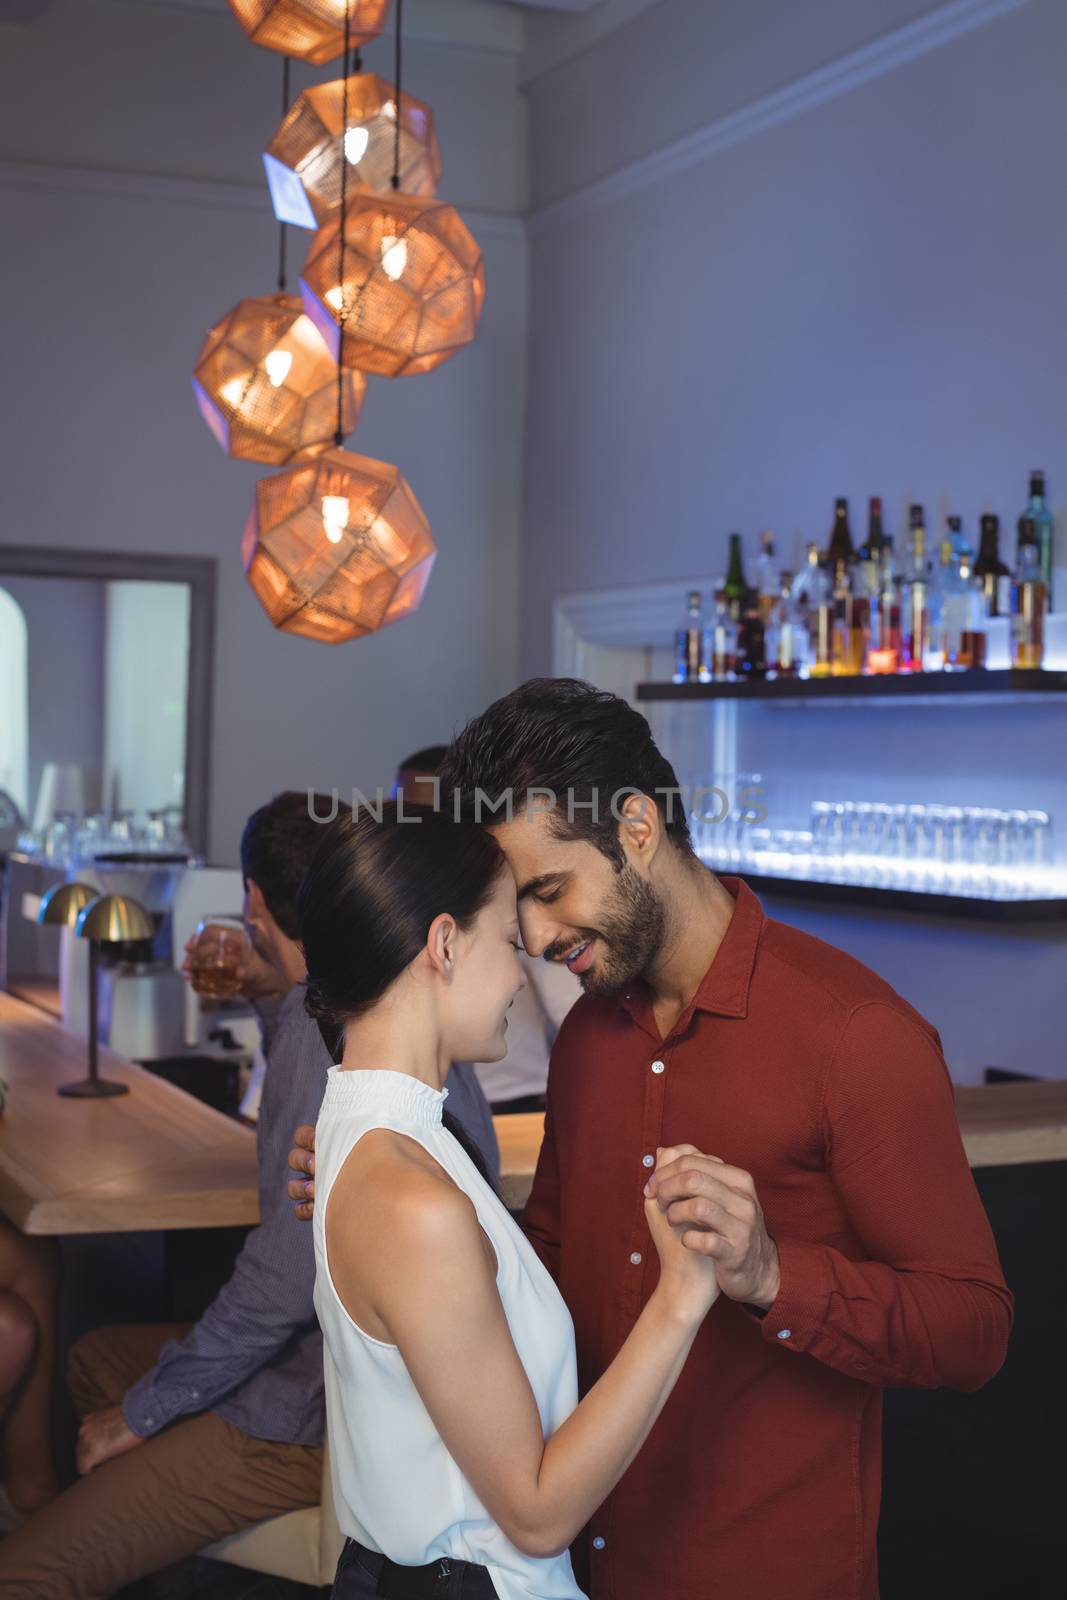 Couple dancing together at bar restaurant by Wavebreakmedia